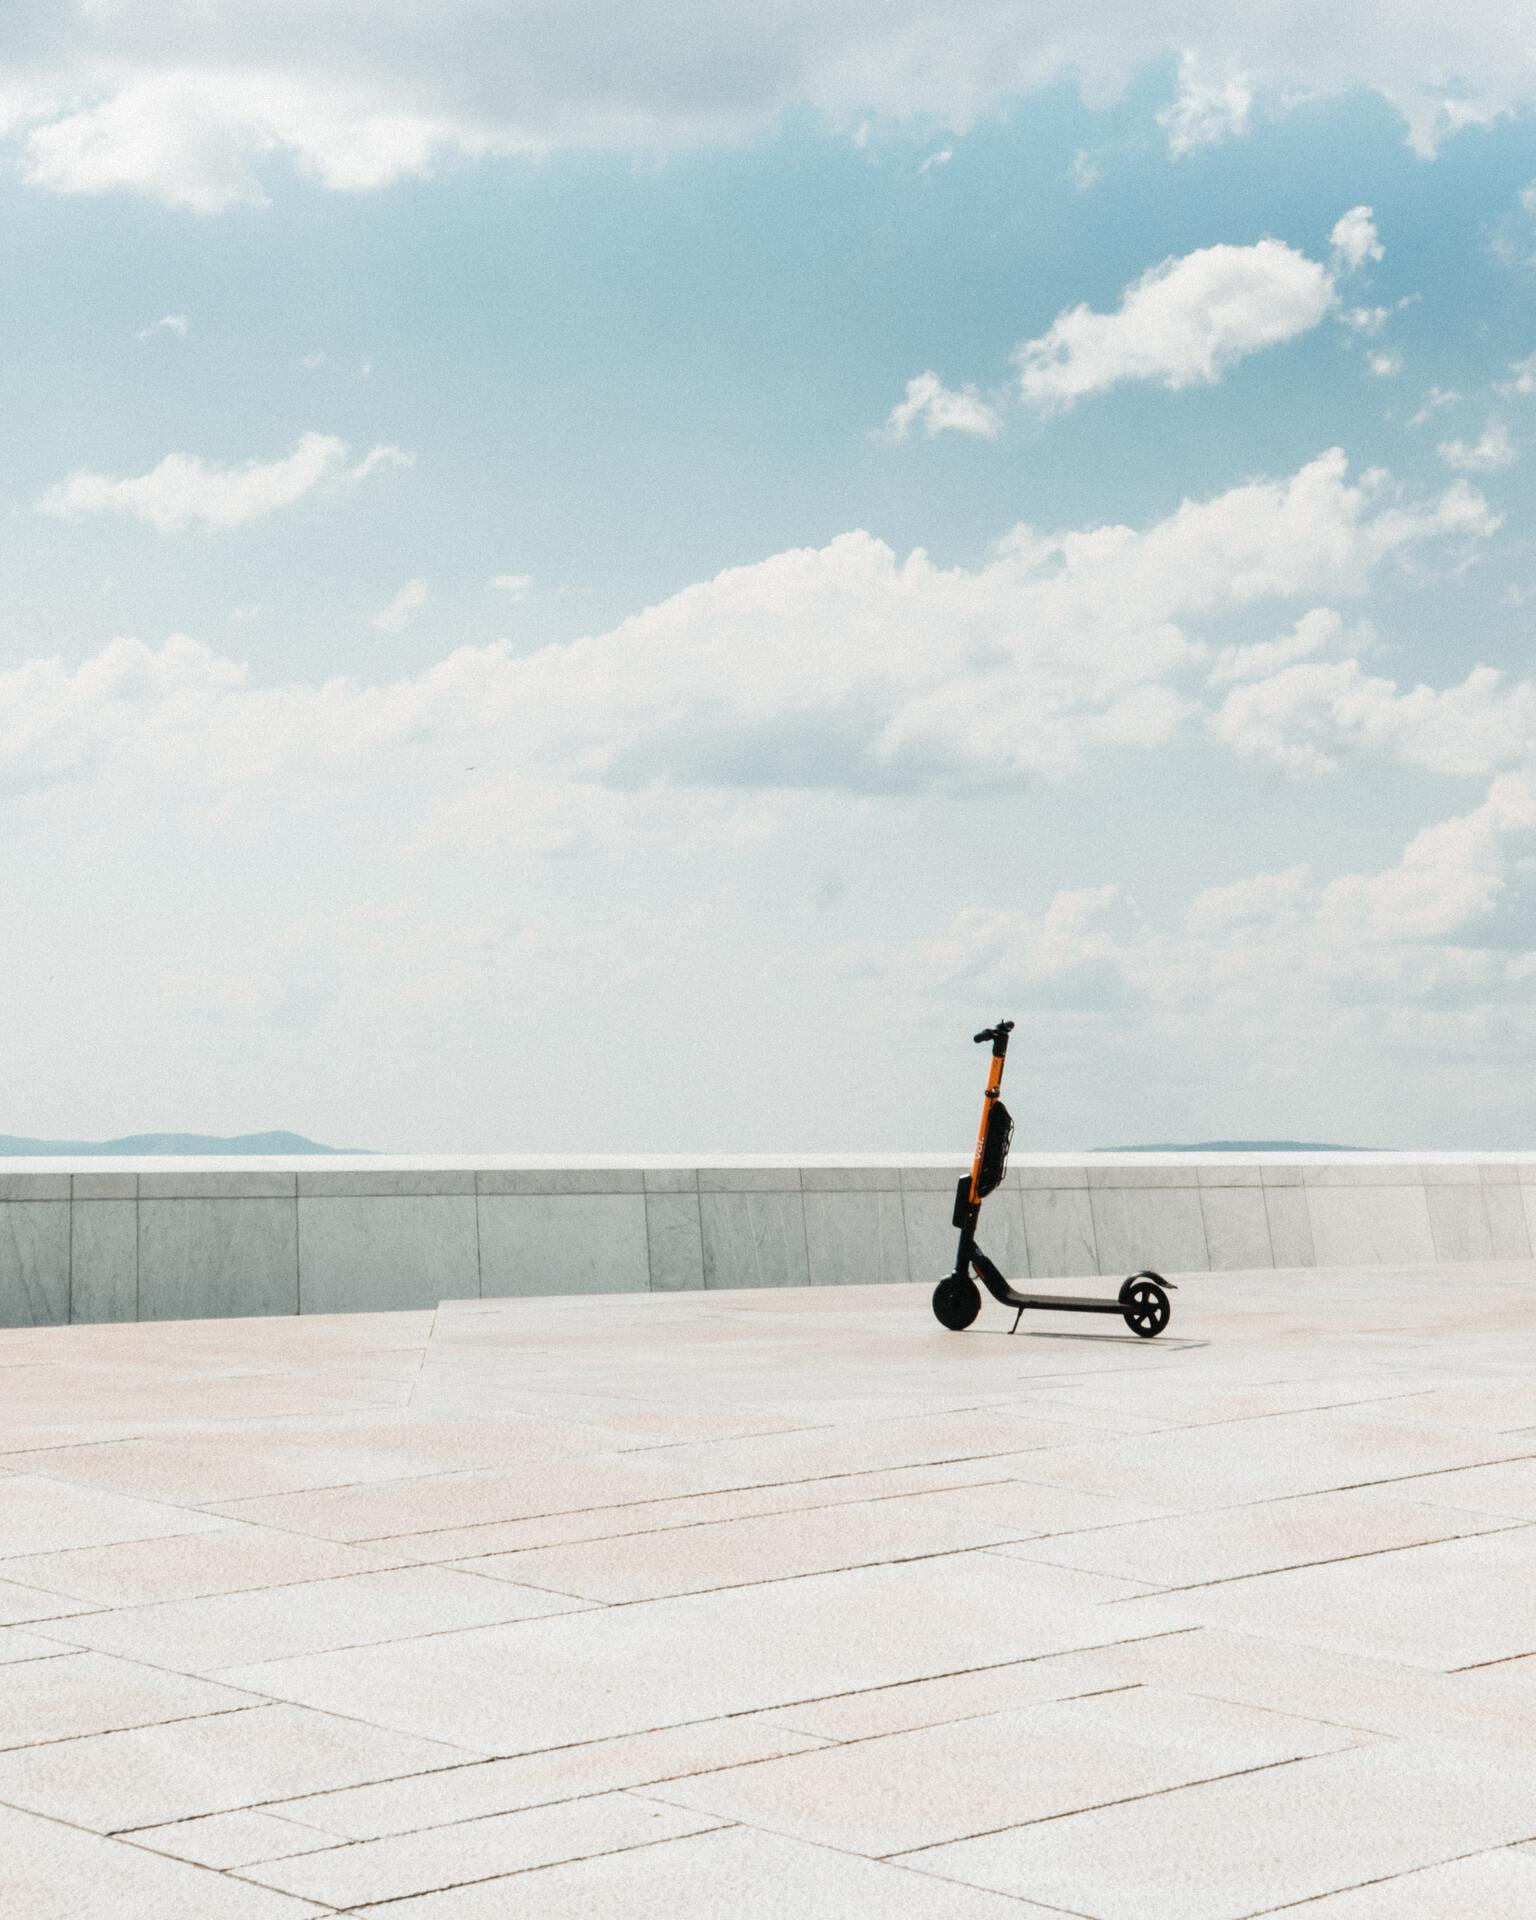 A red and black kick-scooter standing on top of an empty rooftop with an open and cloudy sky.